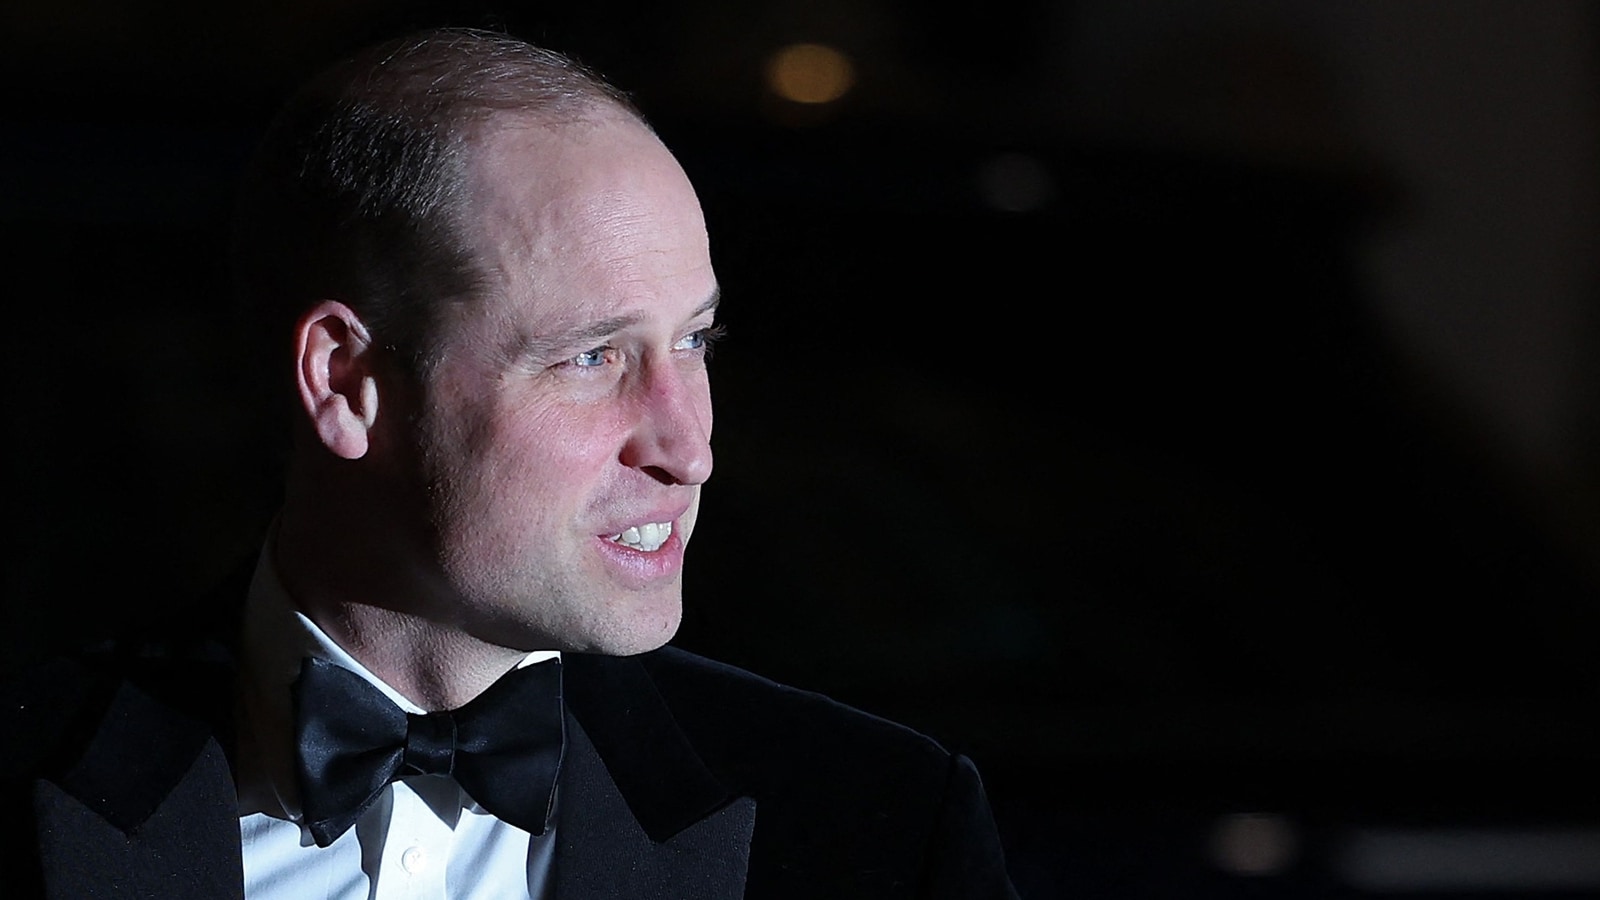 Prince William ‘furious’ over Prince Harry's ‘PR stunt’: Royal Expert